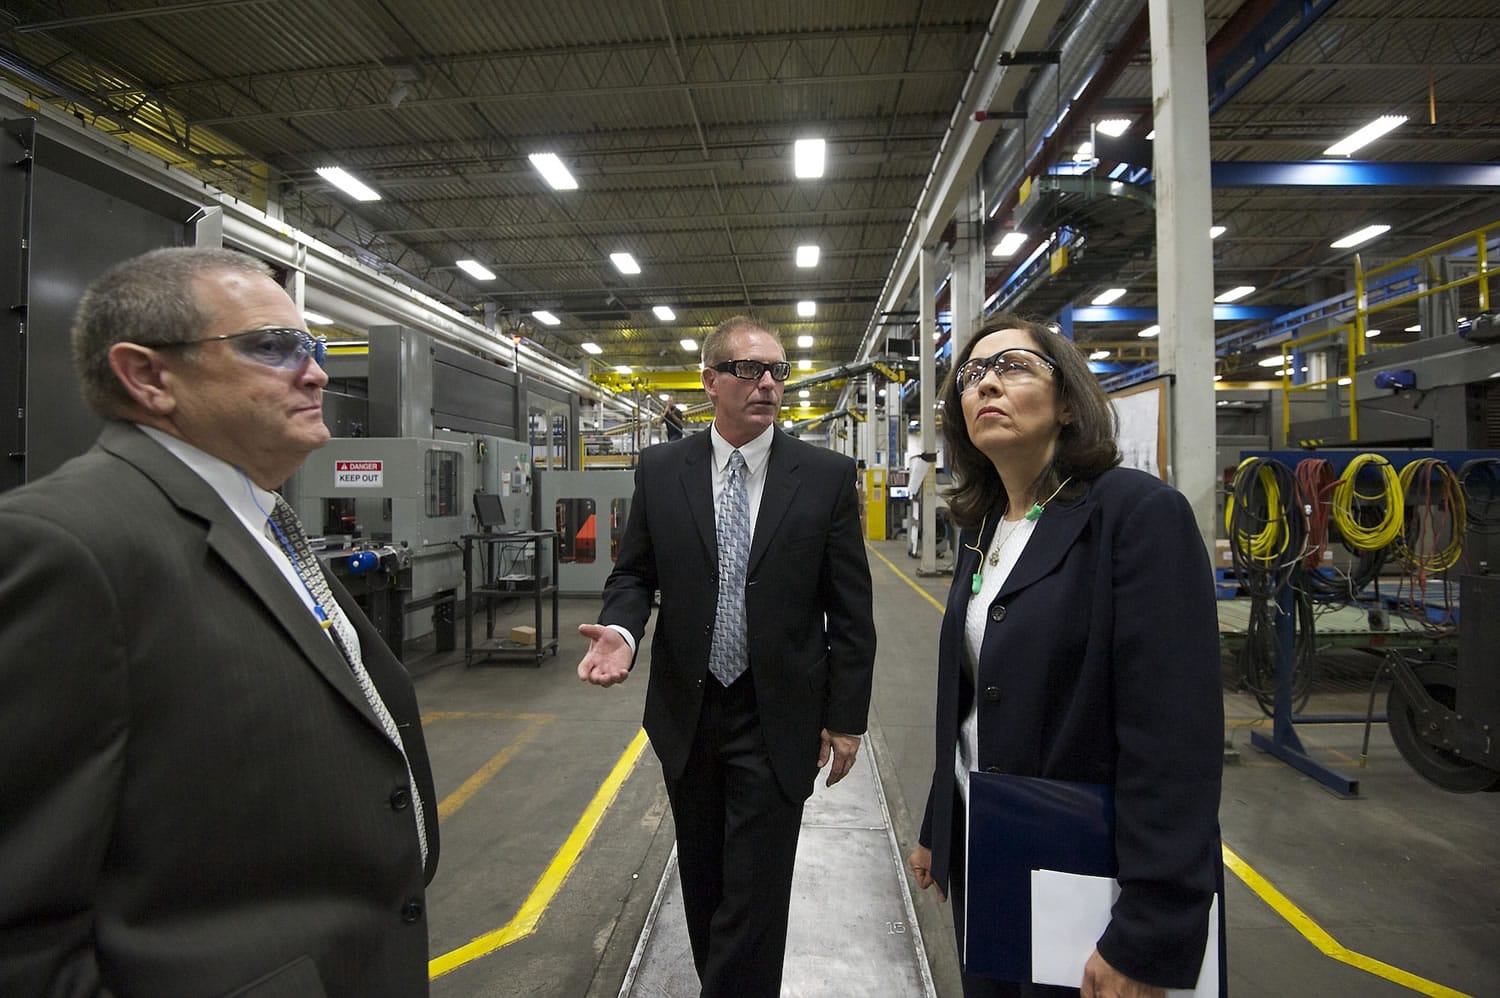 Sen. Maria Cantwell, D-Wash., paid a visit June 30 to Columbia Machine, a Vancouver manufacturer and exporter of equipment used for concrete production, to show support for Congressional reauthorization of the U.S. Export-Import Bank's charter. The bank, which loans to foreign buyers of U.S.